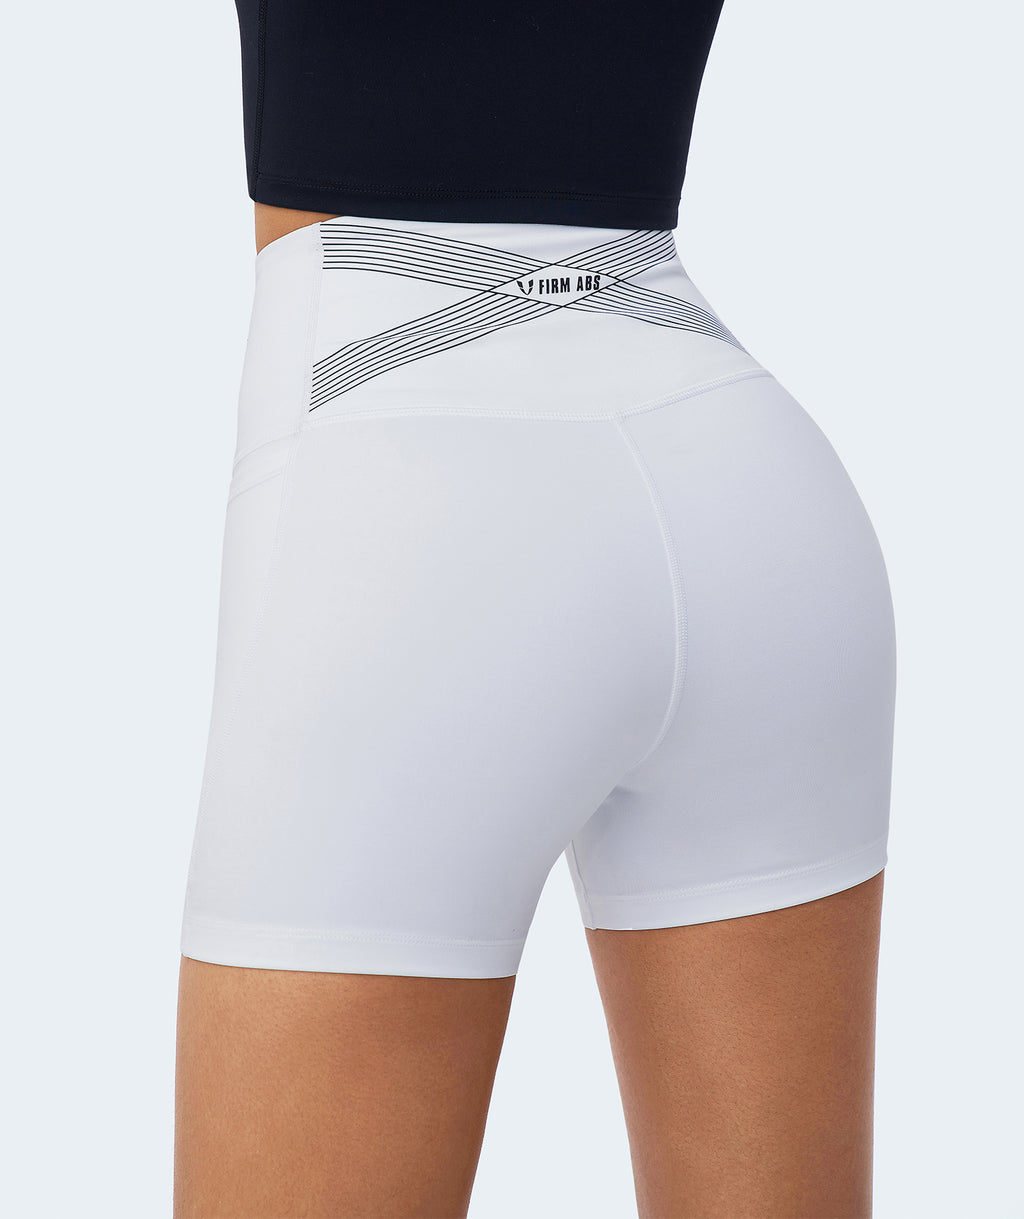 High-waisted Gym Shorts White | FIRM ABS